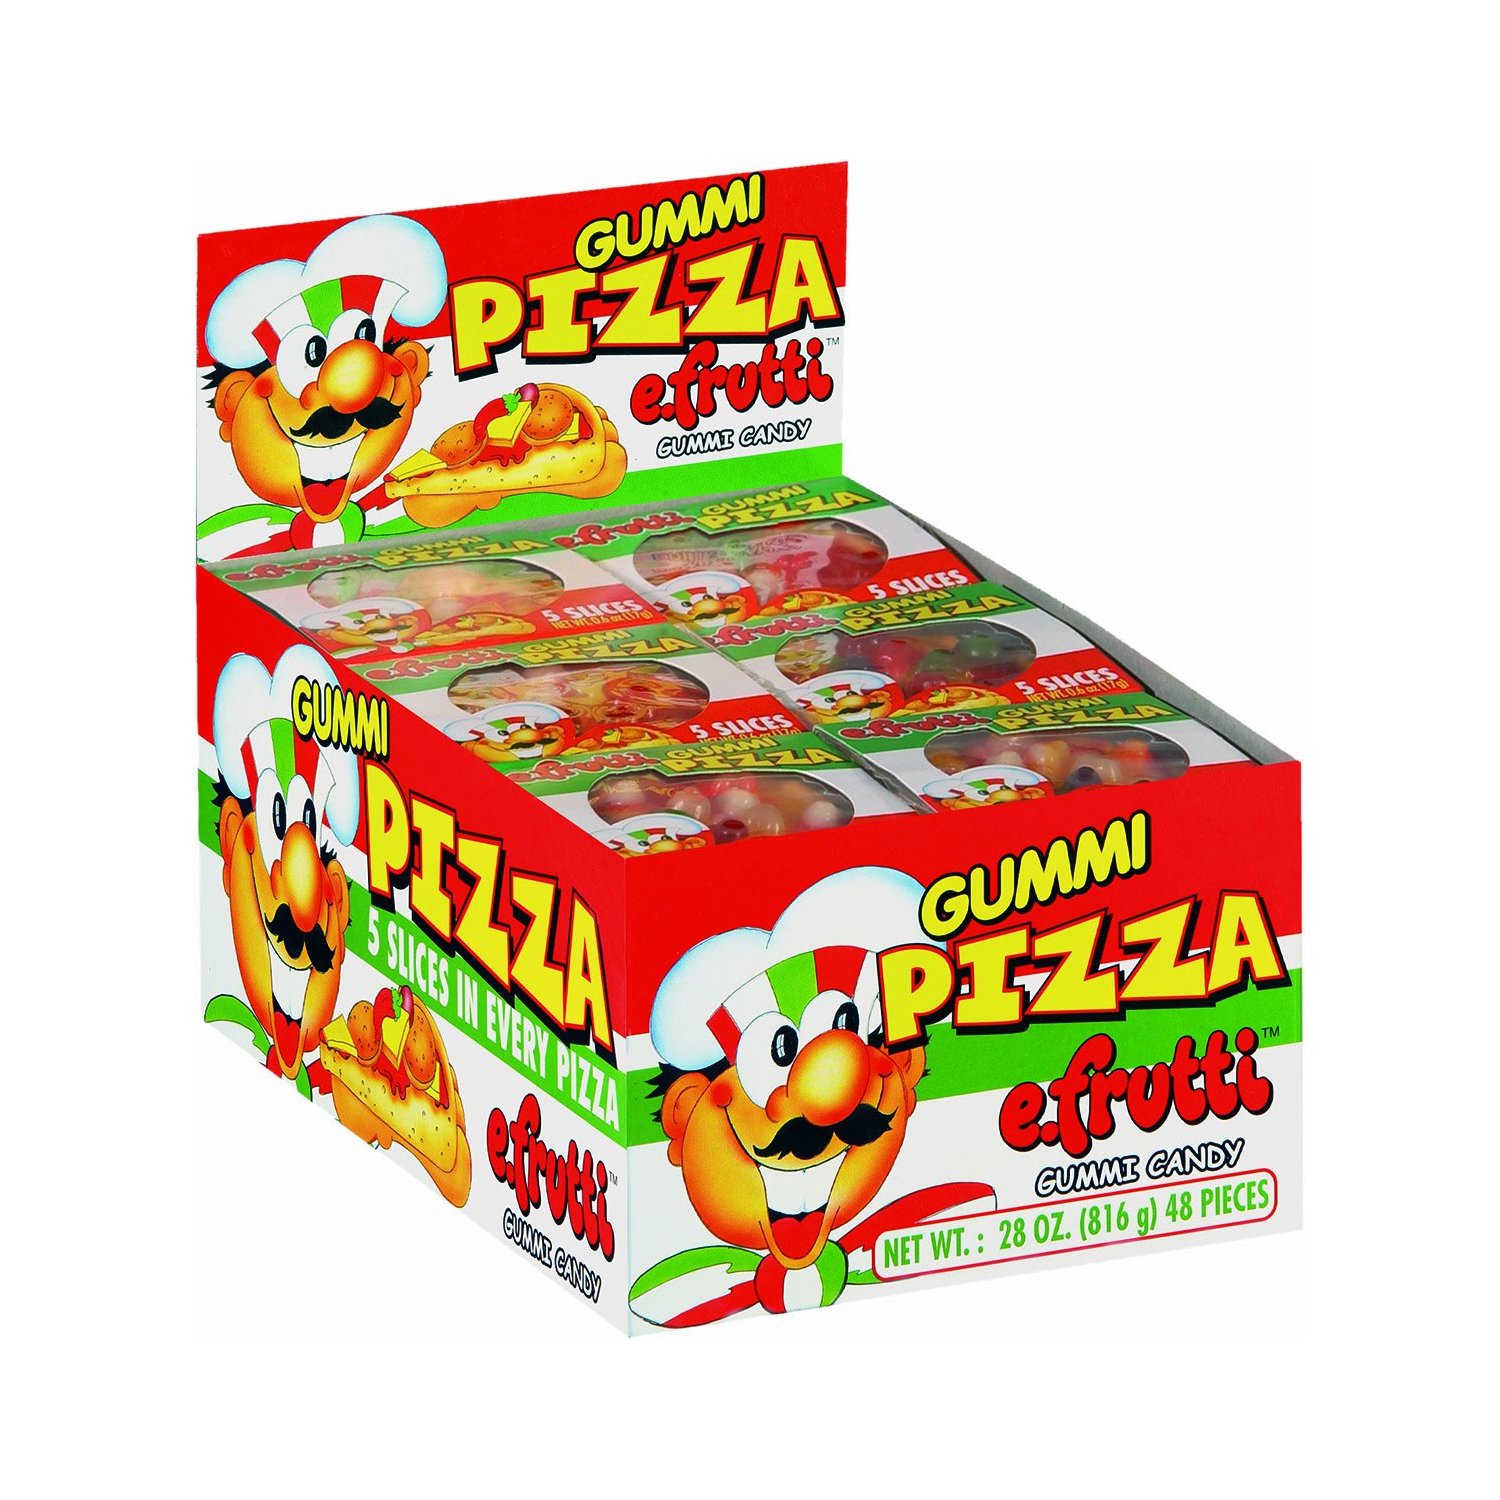 Gummi Pizza - a great novelty gift this Christmas